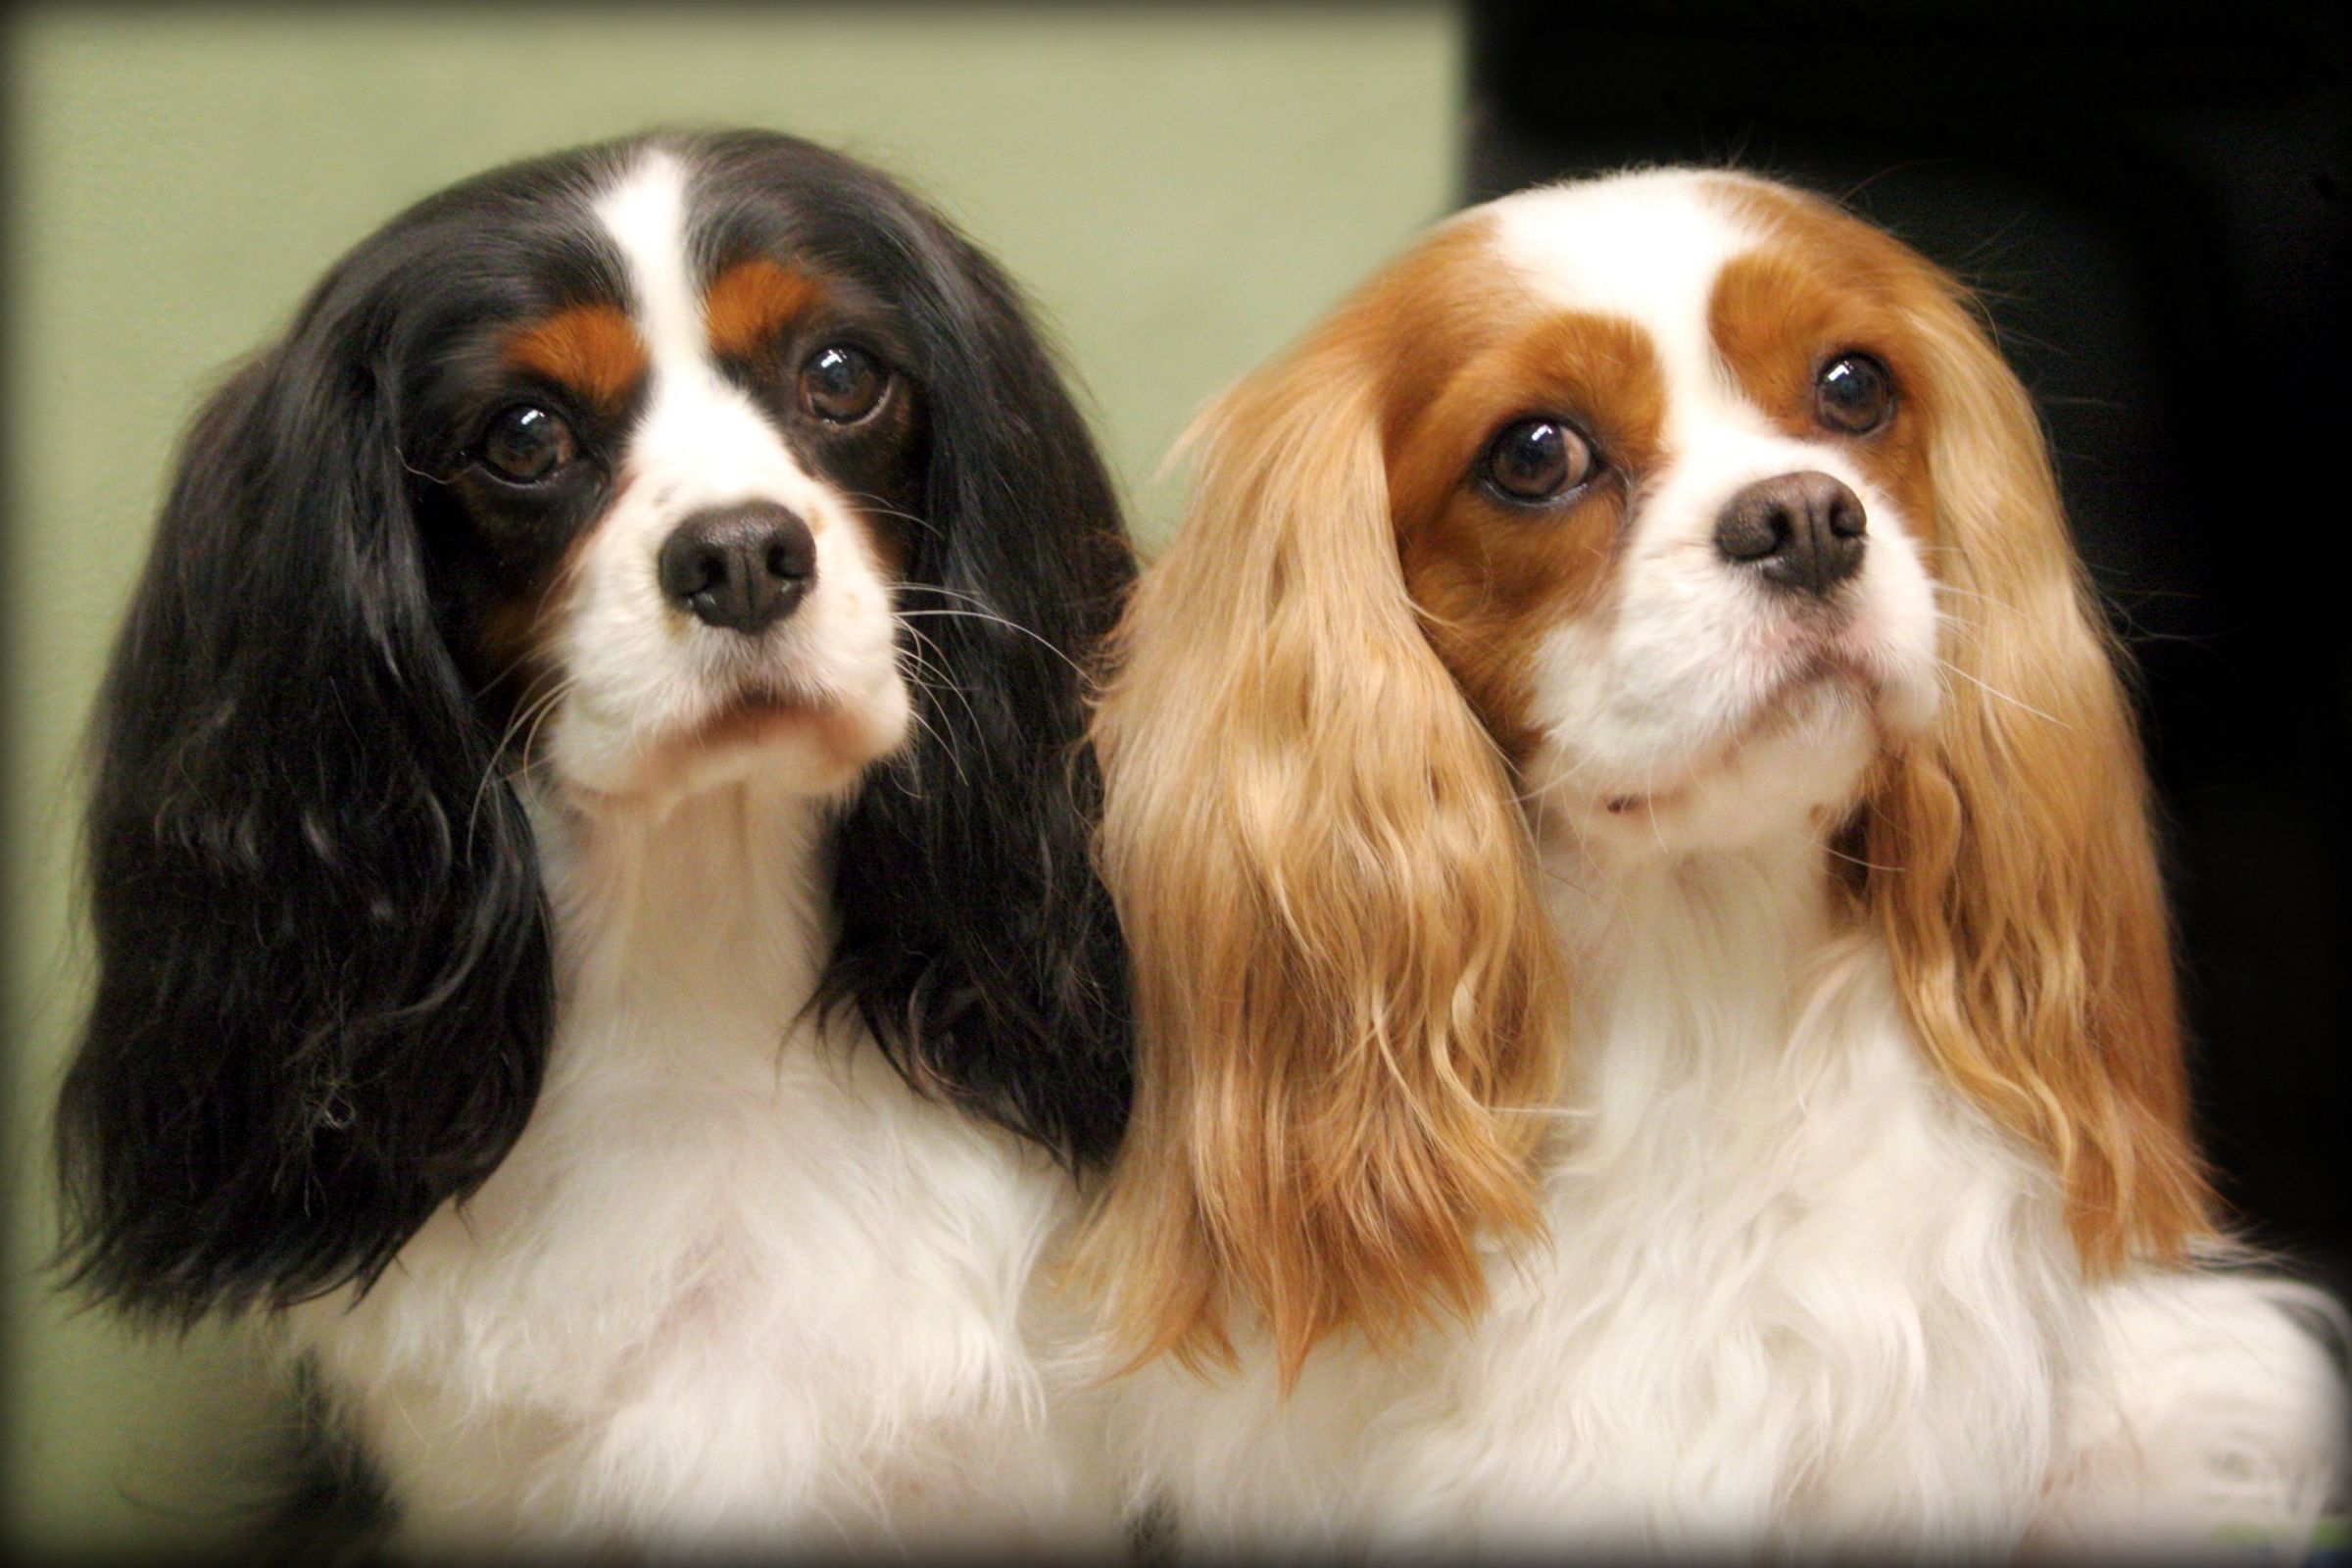 rescue cavalier king charles spaniels